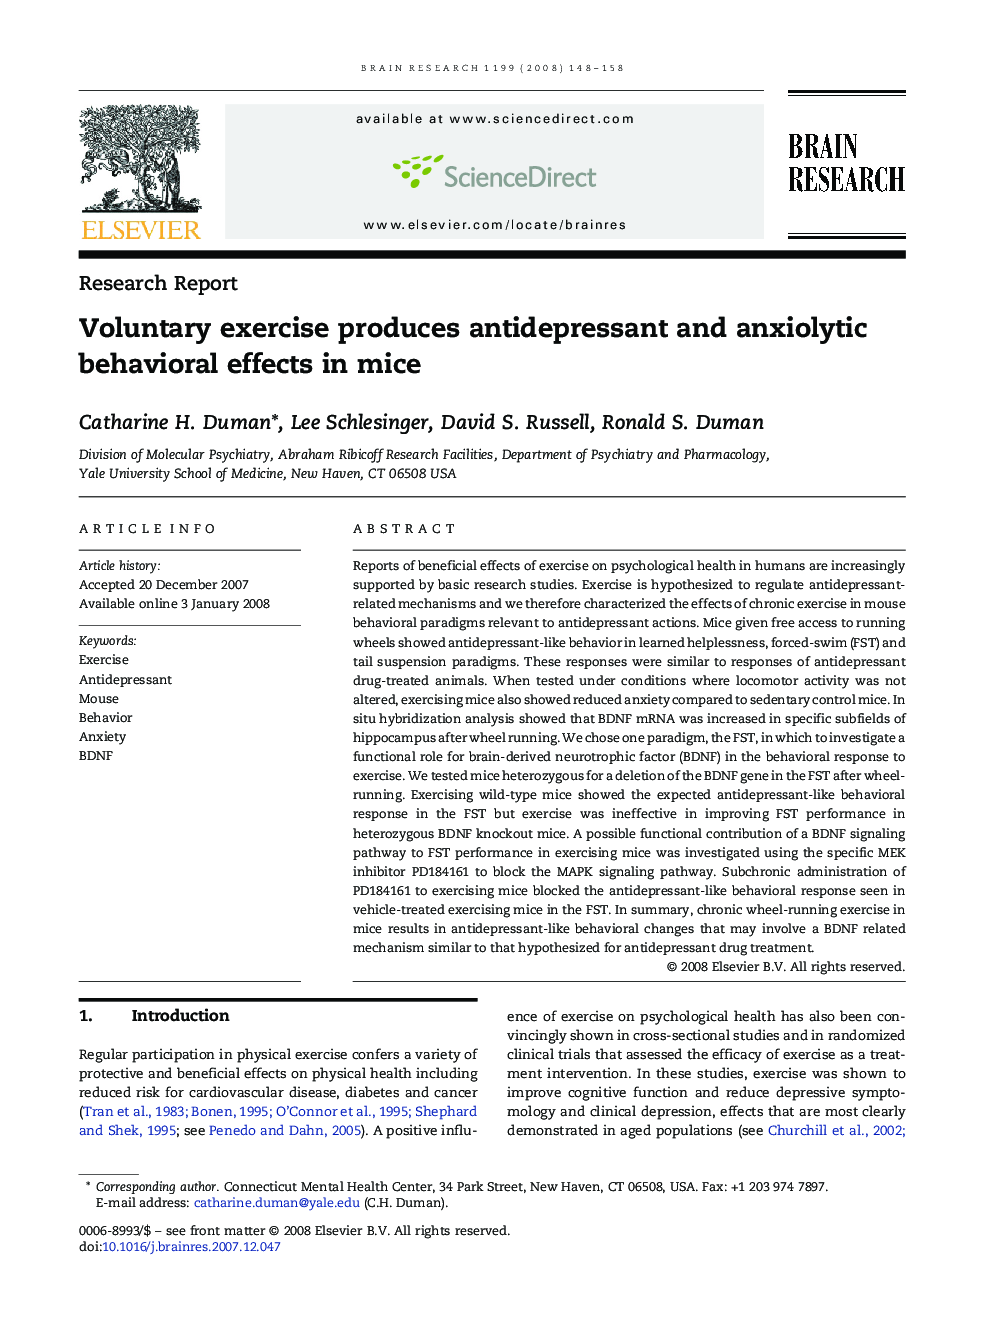 Voluntary exercise produces antidepressant and anxiolytic behavioral effects in mice